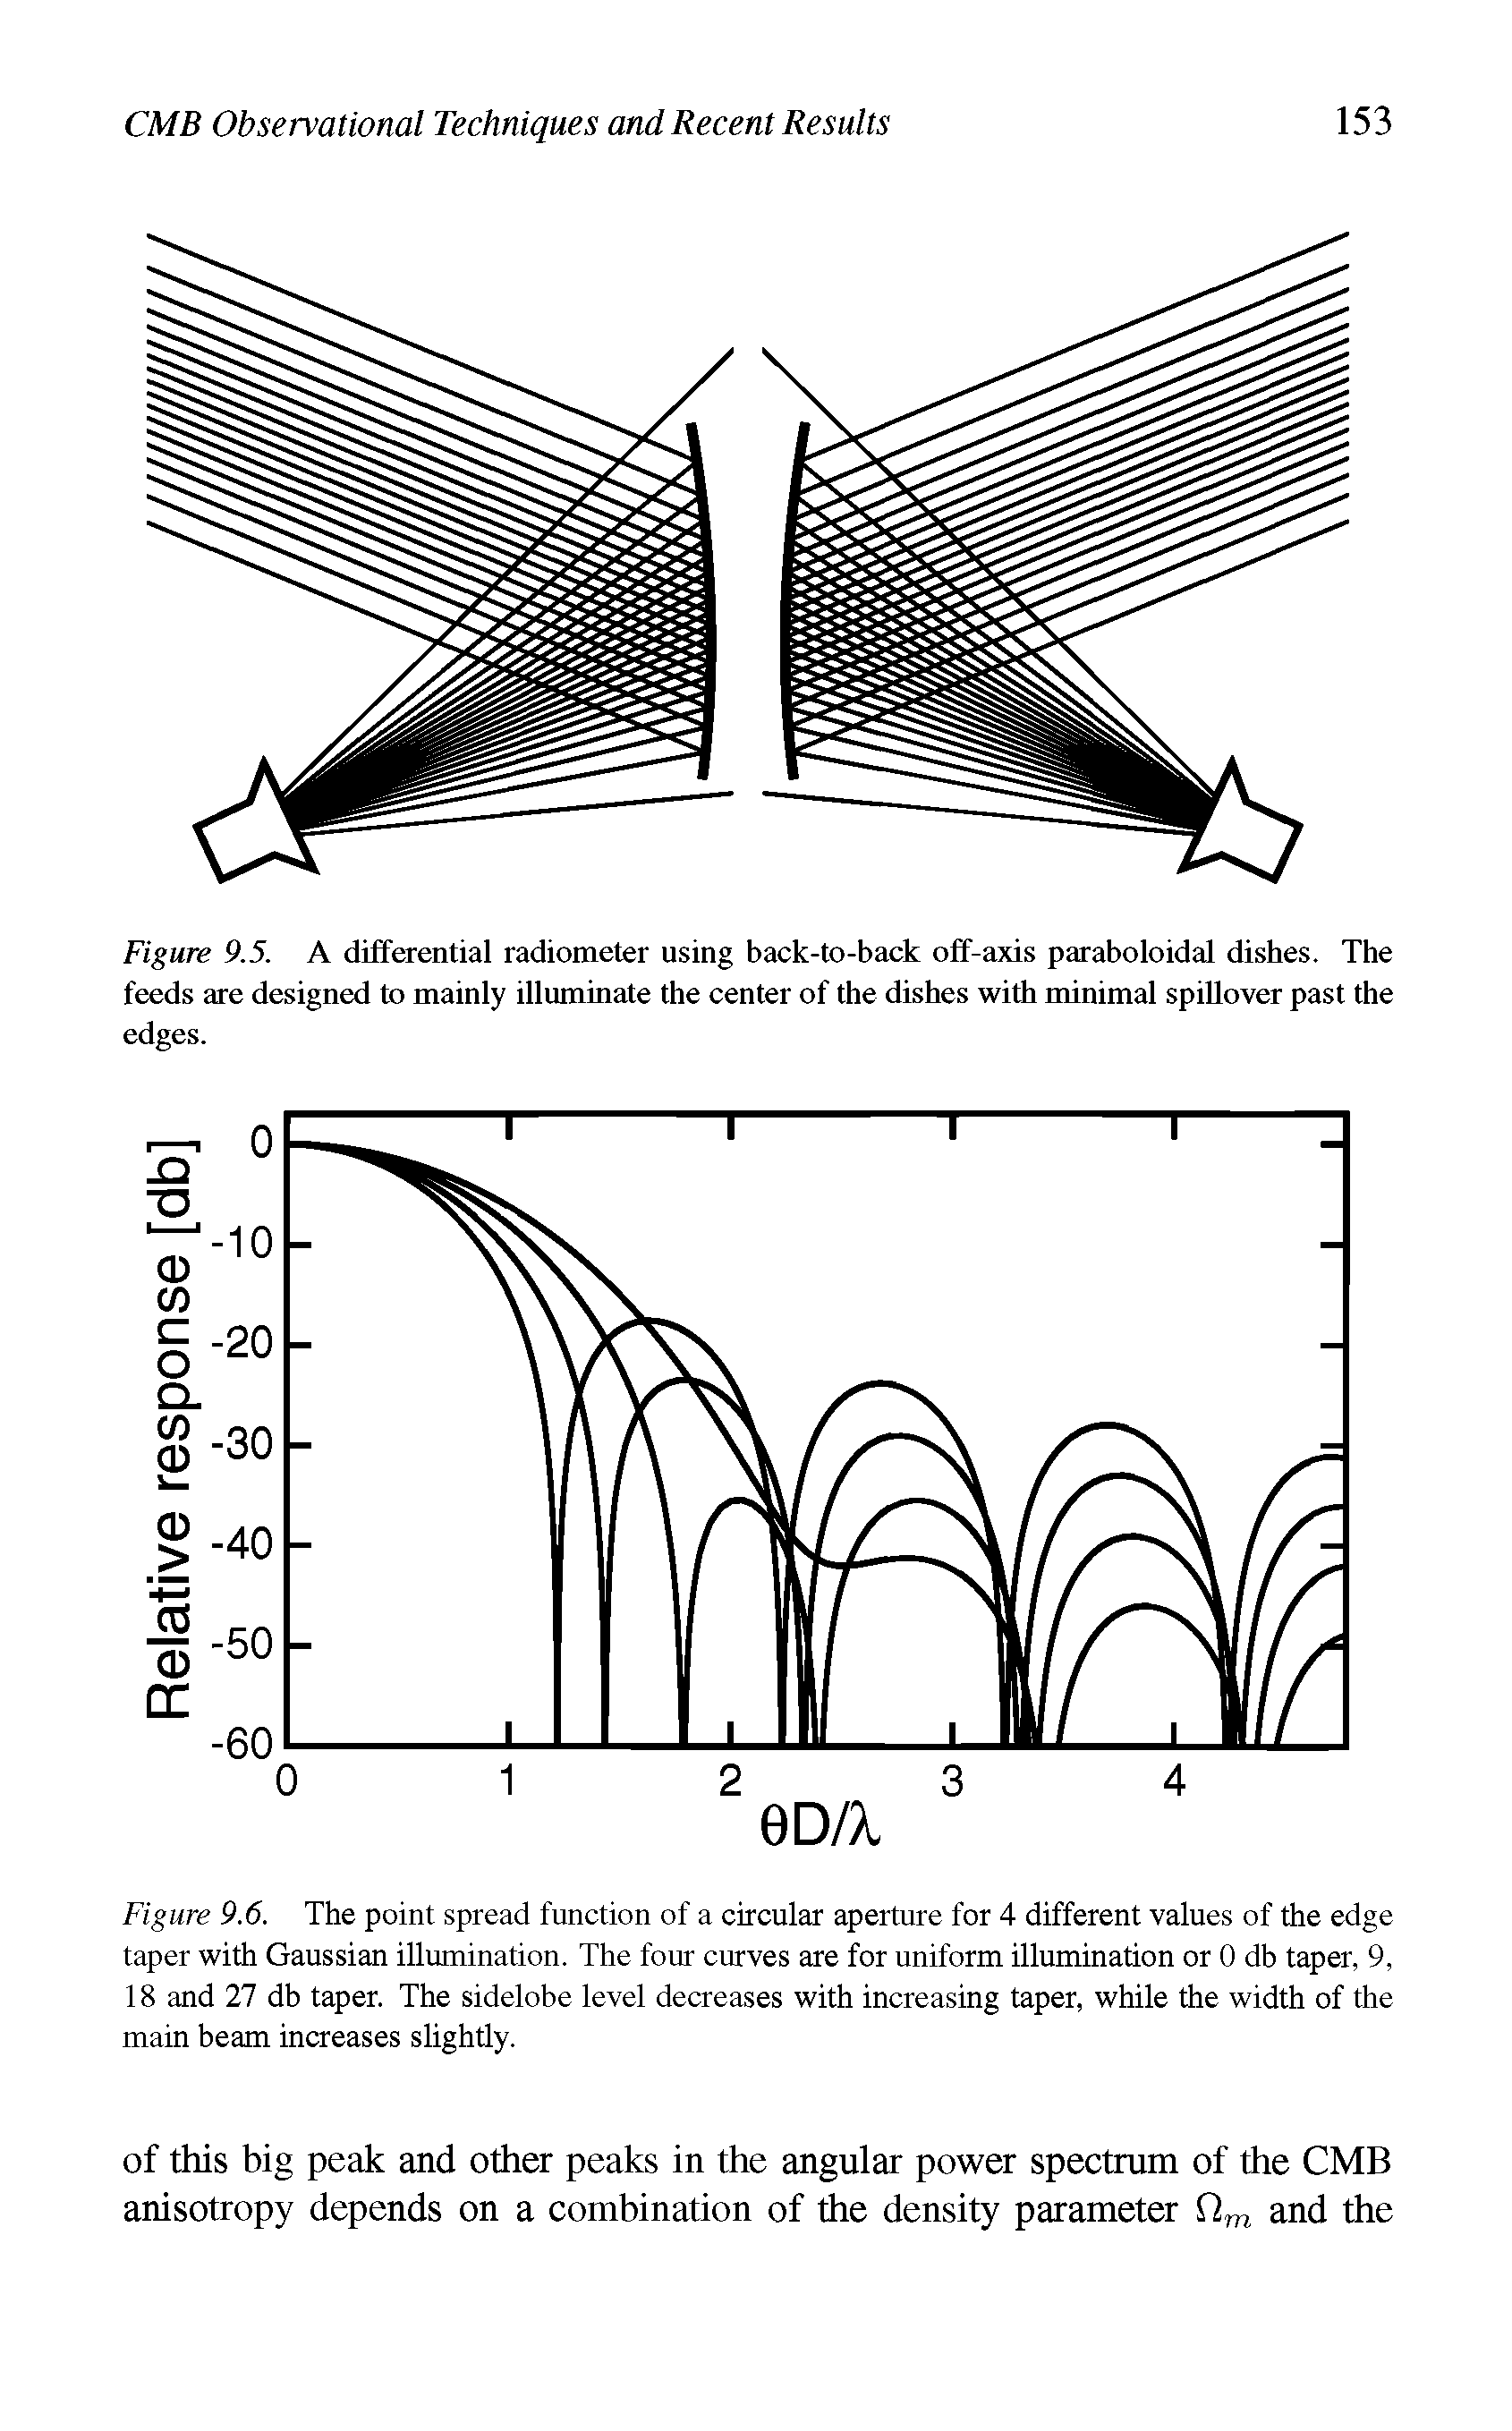 Figure 9.6. The point spread function of a circular aperture for 4 different values of the edge taper with Gaussian illumination. The four curves are for uniform illumination or 0 db taper, 9, 18 and 27 db taper. The sidelobe level decreases with increasing taper, while the width of the main beam increases slightly.